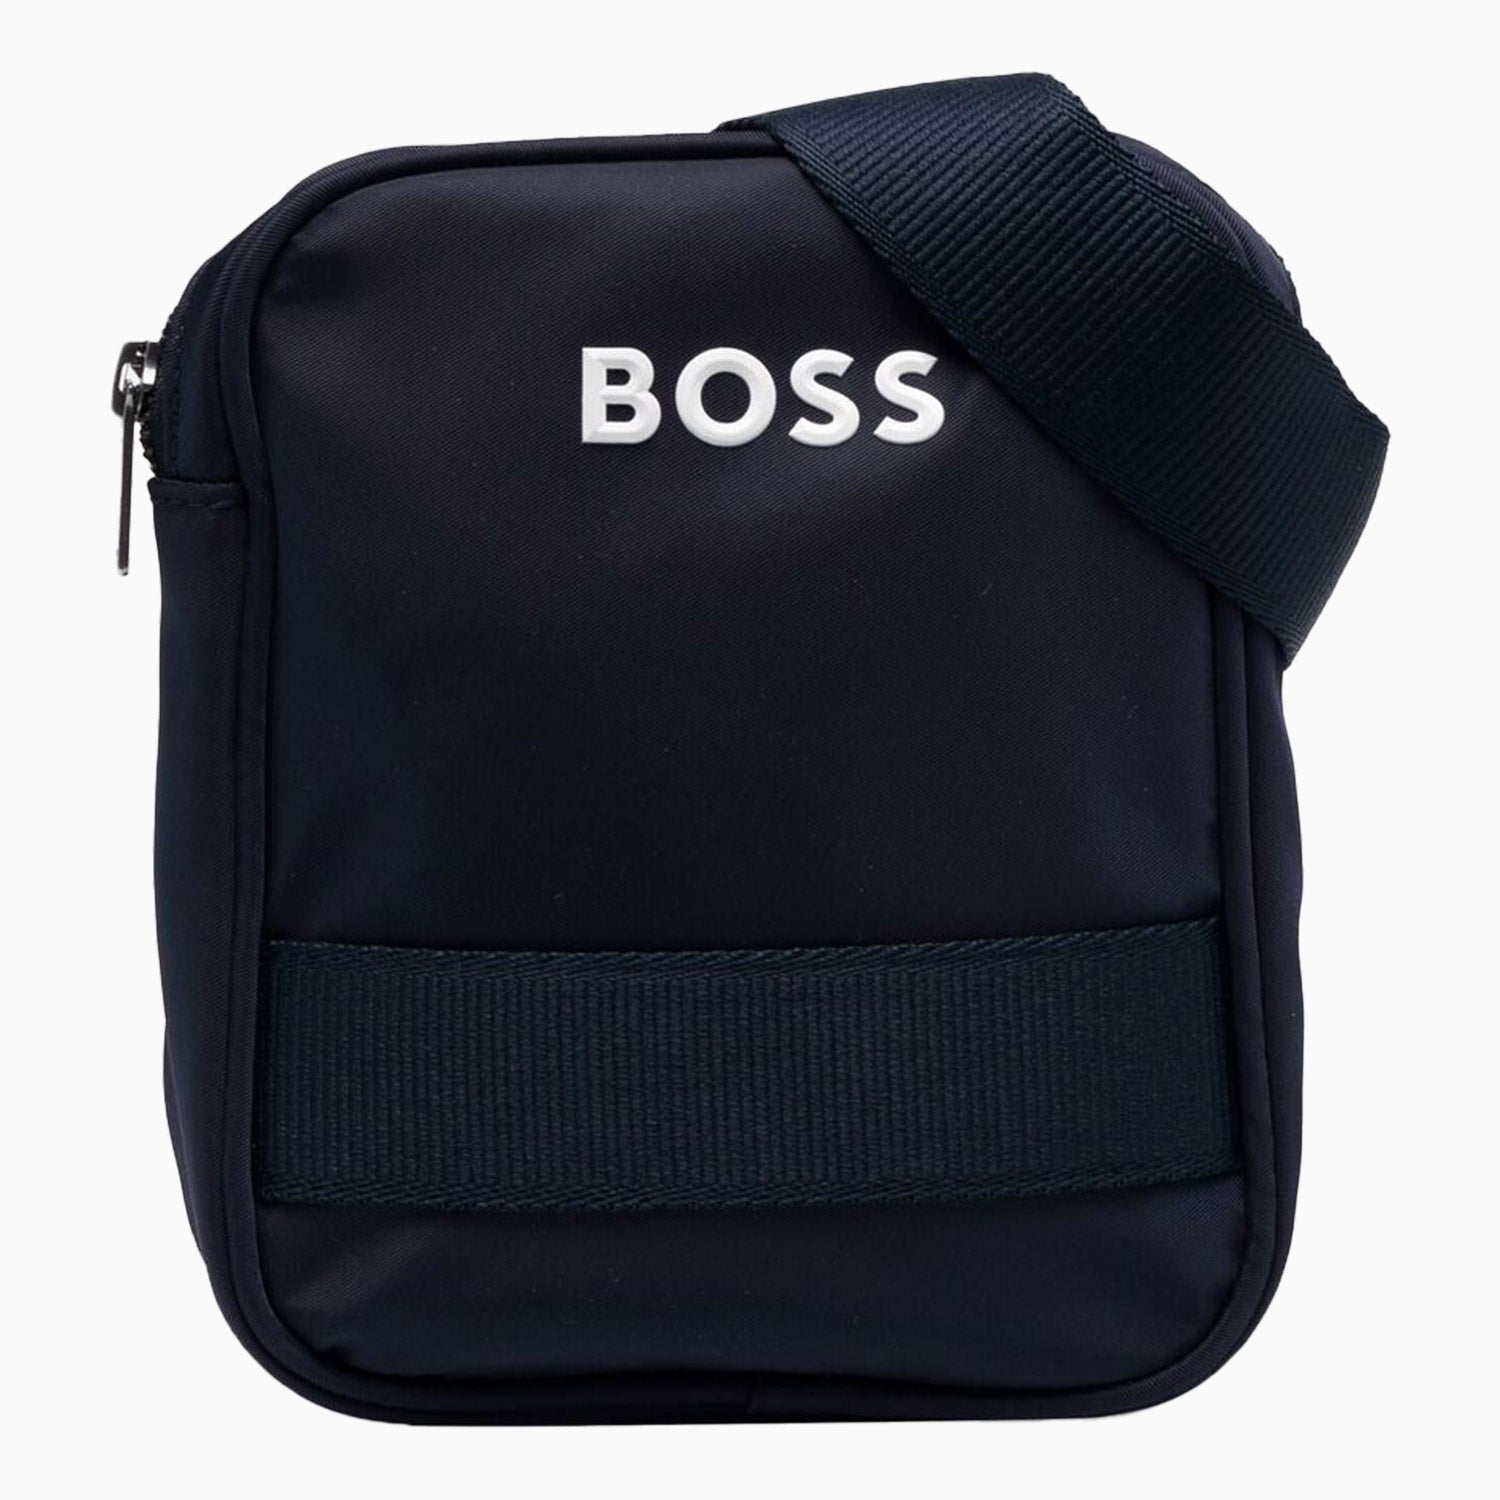 Hugo Boss Kid's Polyester Twill Pouch Bag - Color: Navy - Kids Premium Clothing -